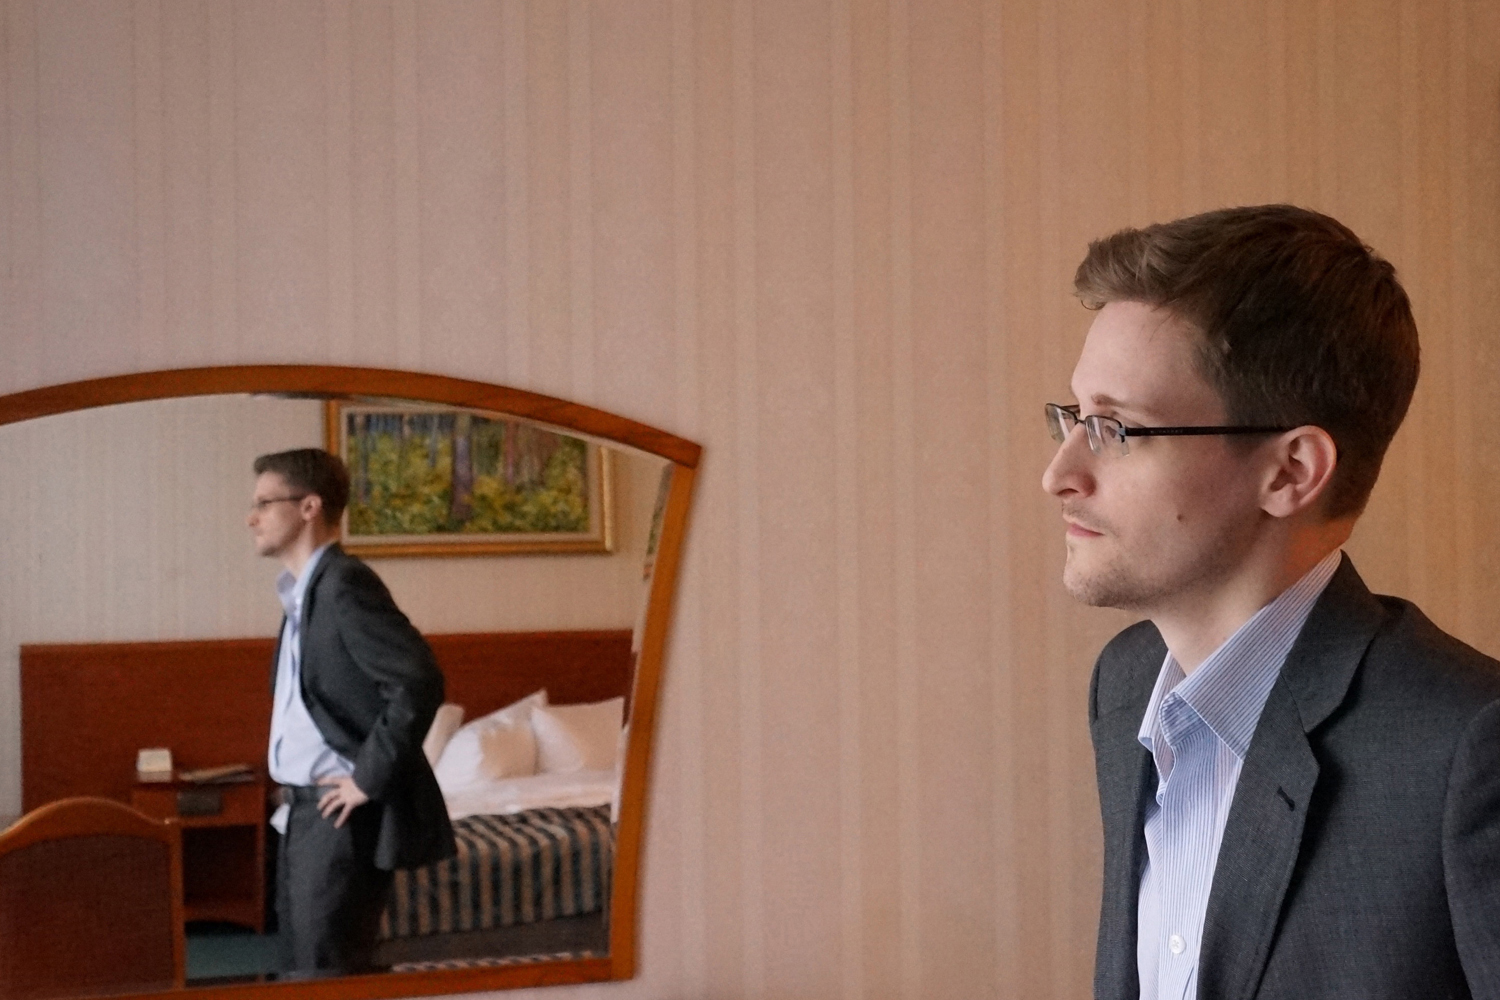 Former intelligence contractor Edward Snowden poses for a photo during an interview in an undisclosed location in December 2013 in Moscow.